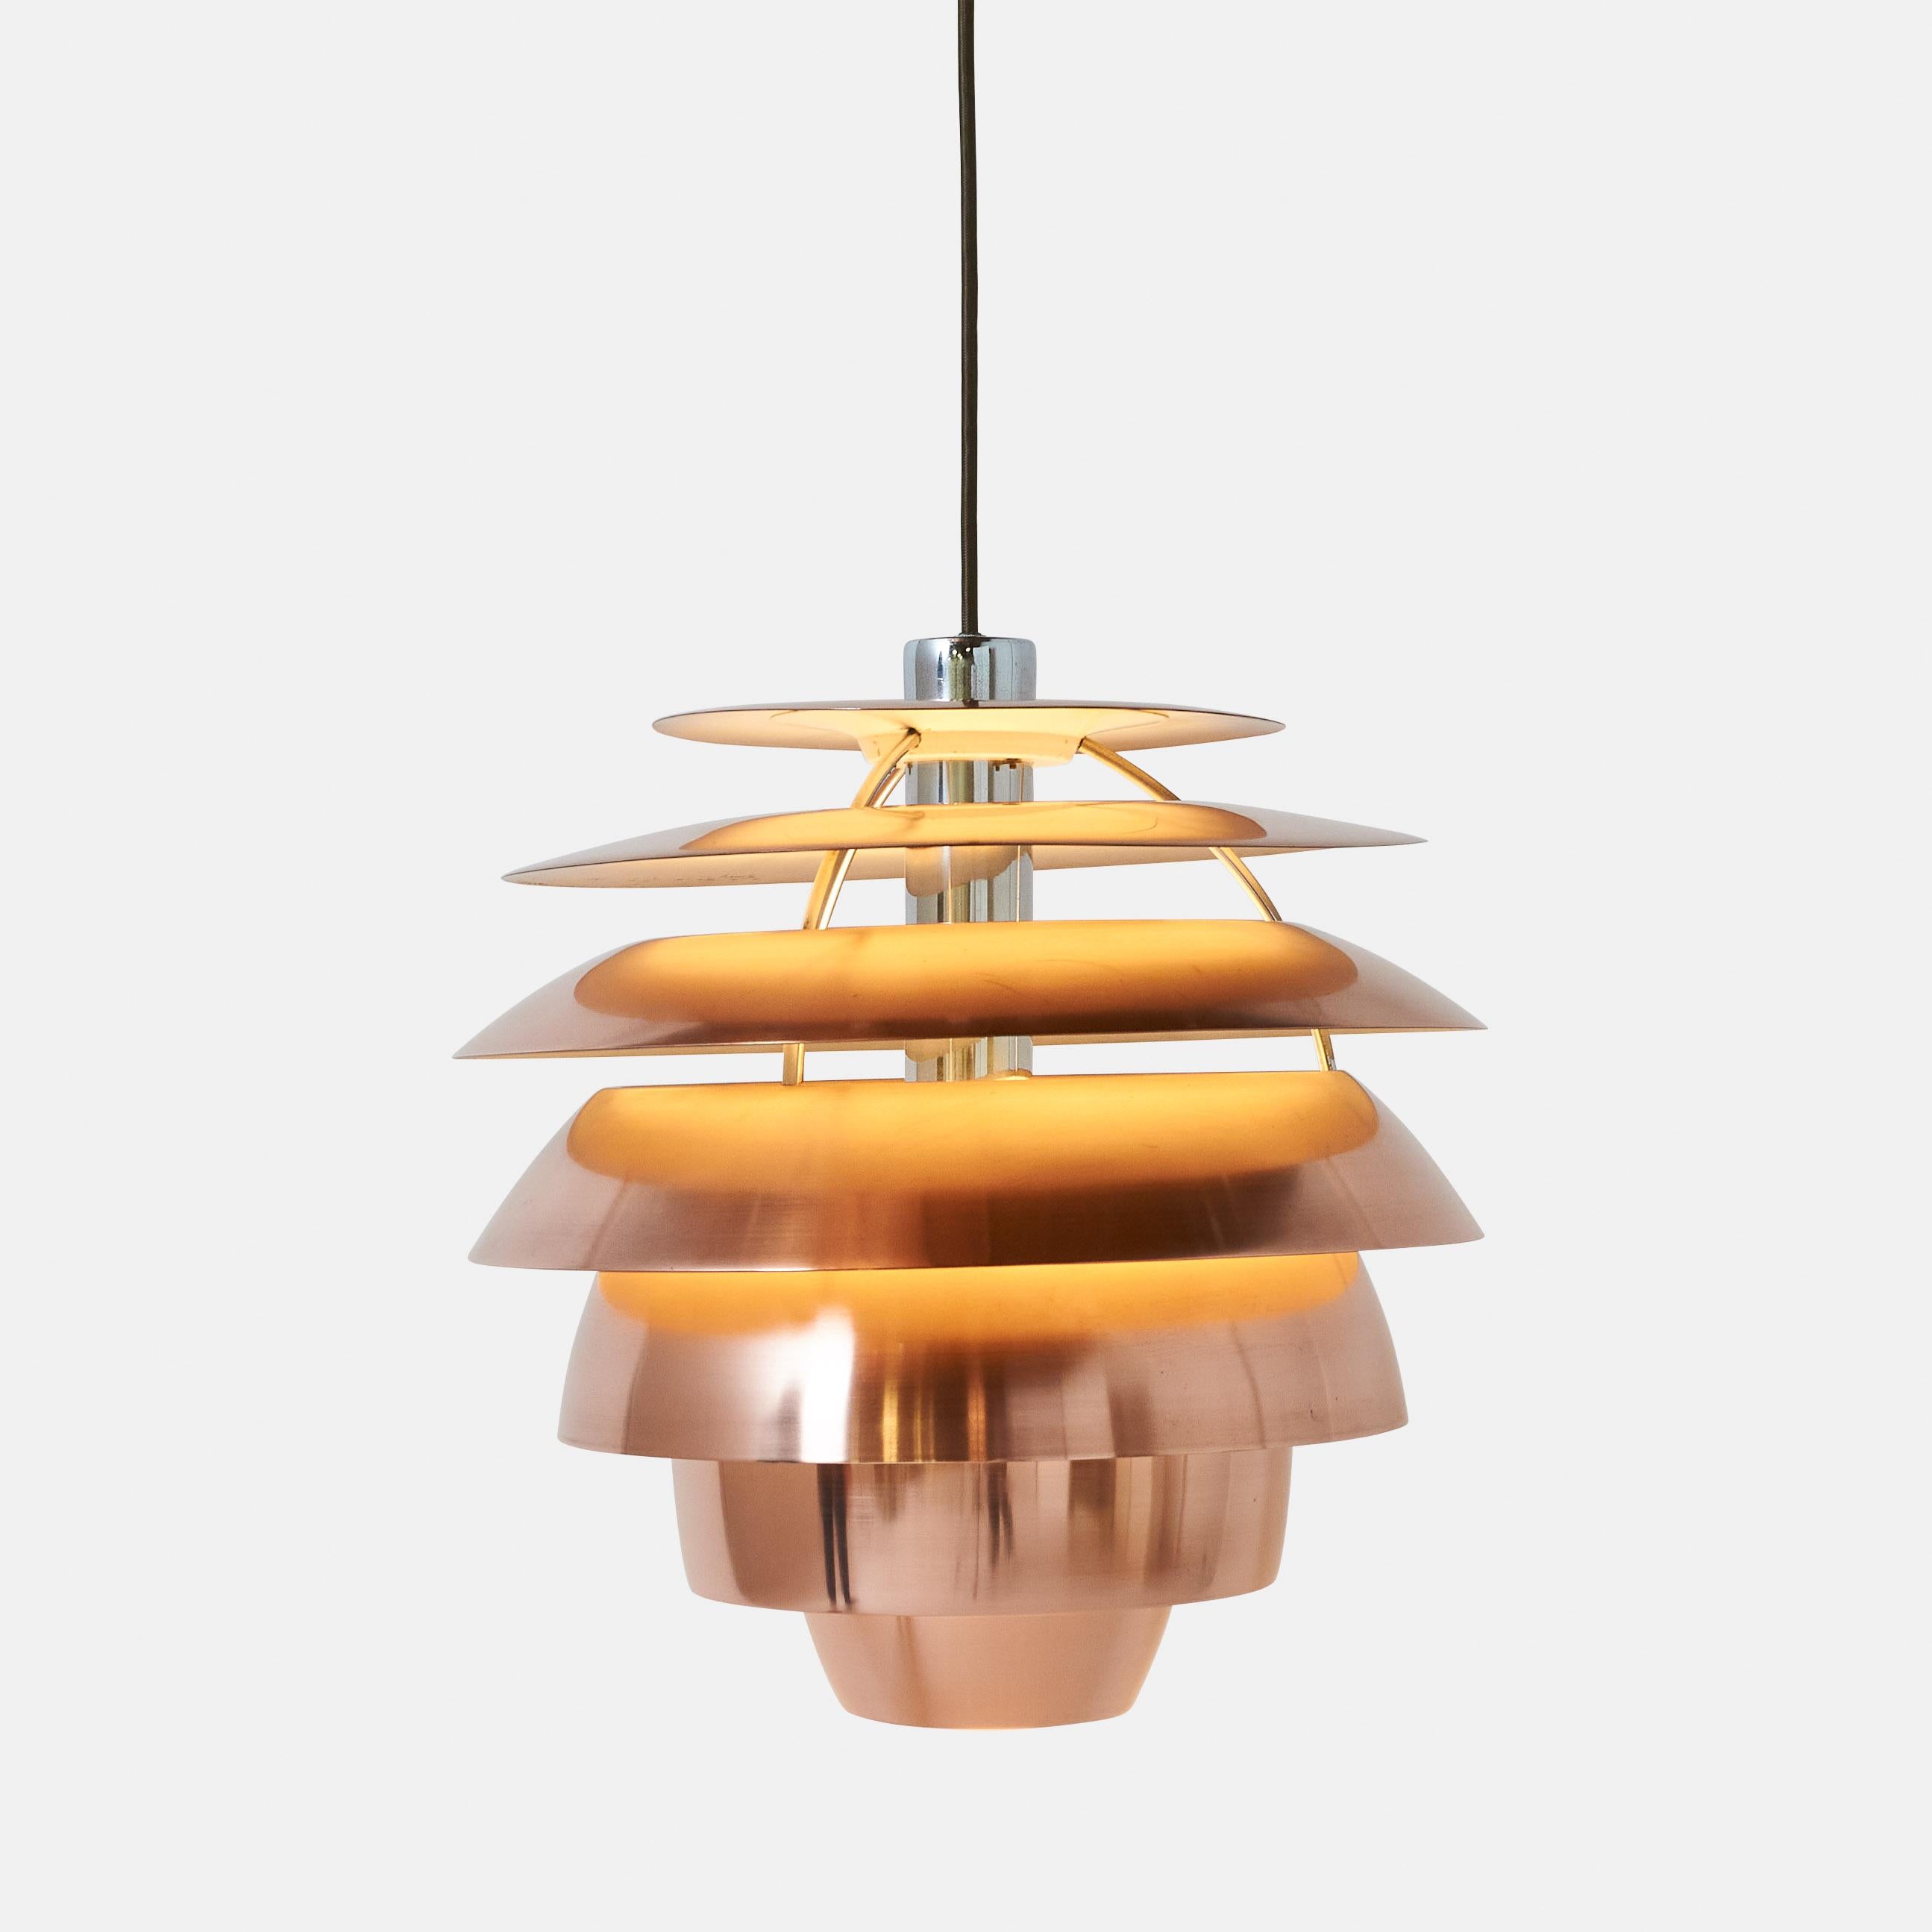 A model 1231 pendant by Stilnovo. Layers of brushed copper with white lacquer on the inside. Shaped like a beehive, there is a soft glow when lit. The copper layers have been restored and wiring is new. 